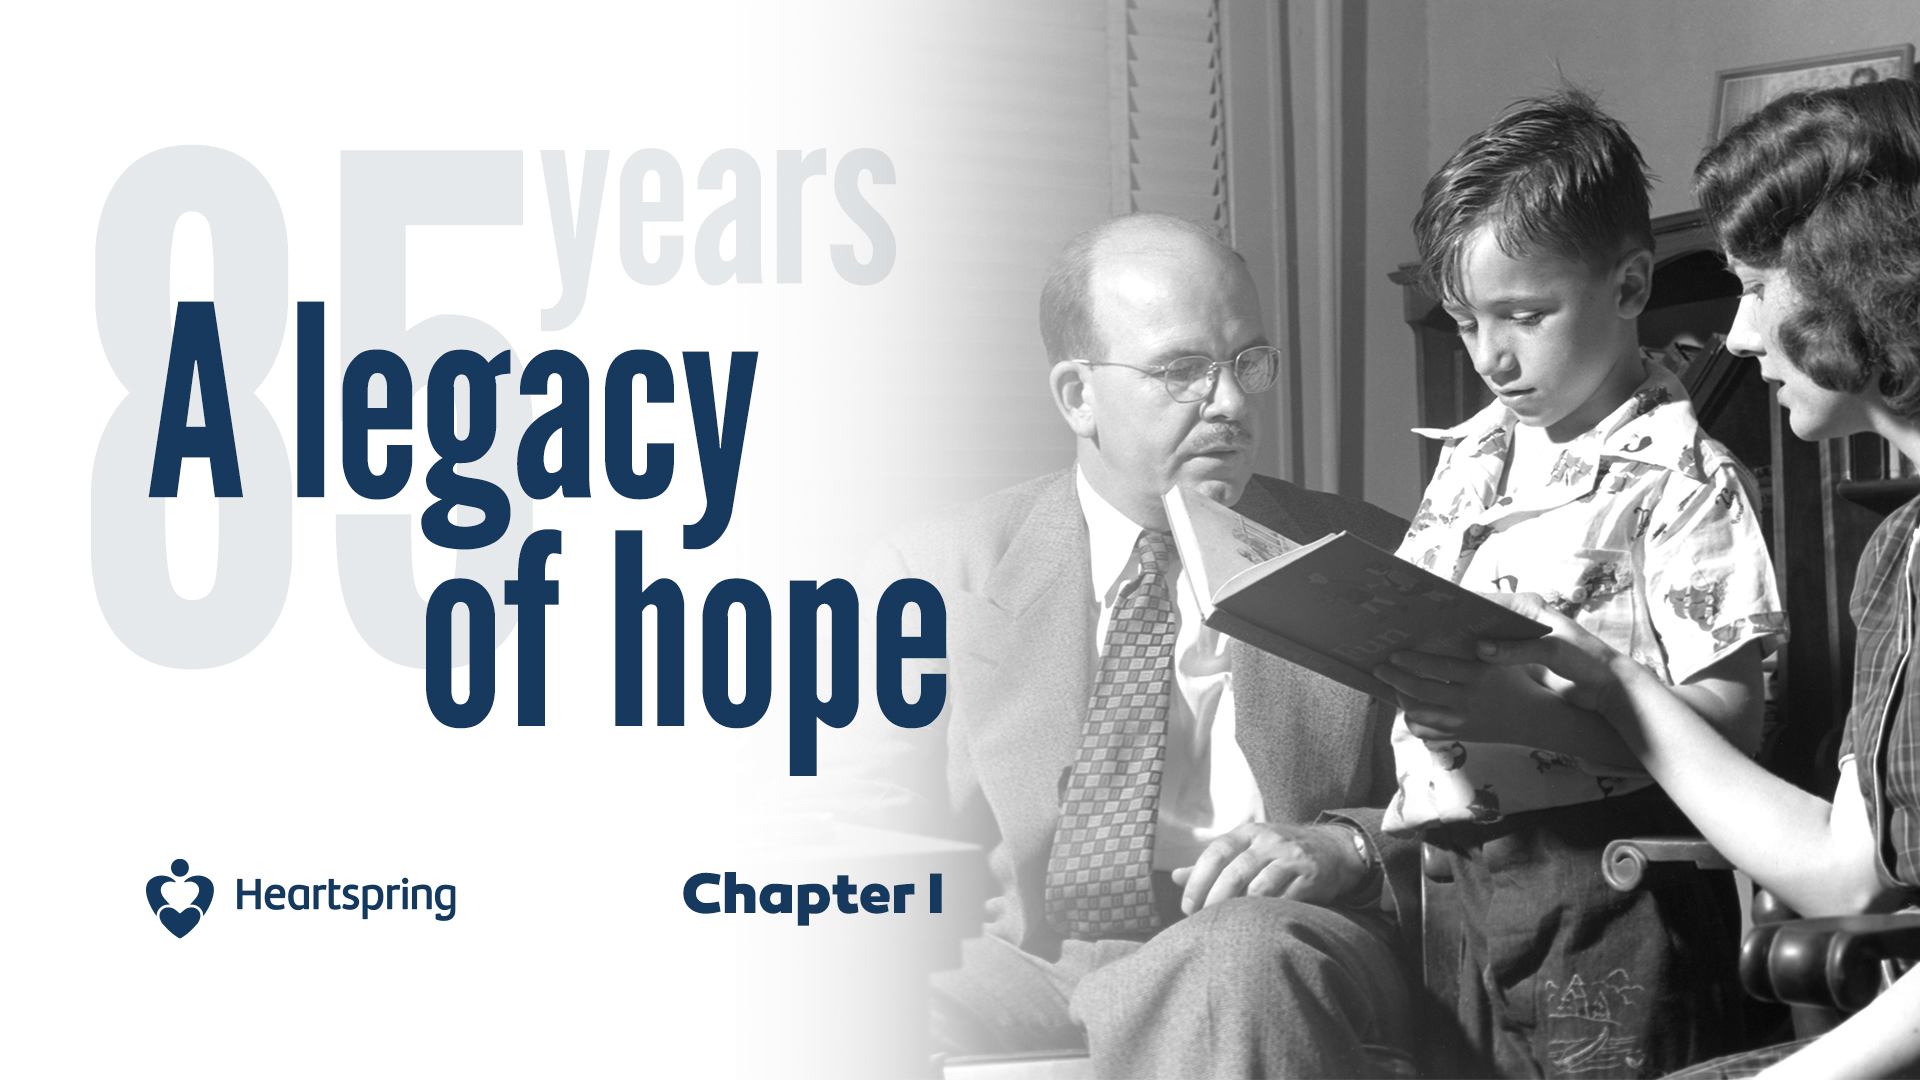 Chapter I: 85 Years A Legacy of Hope